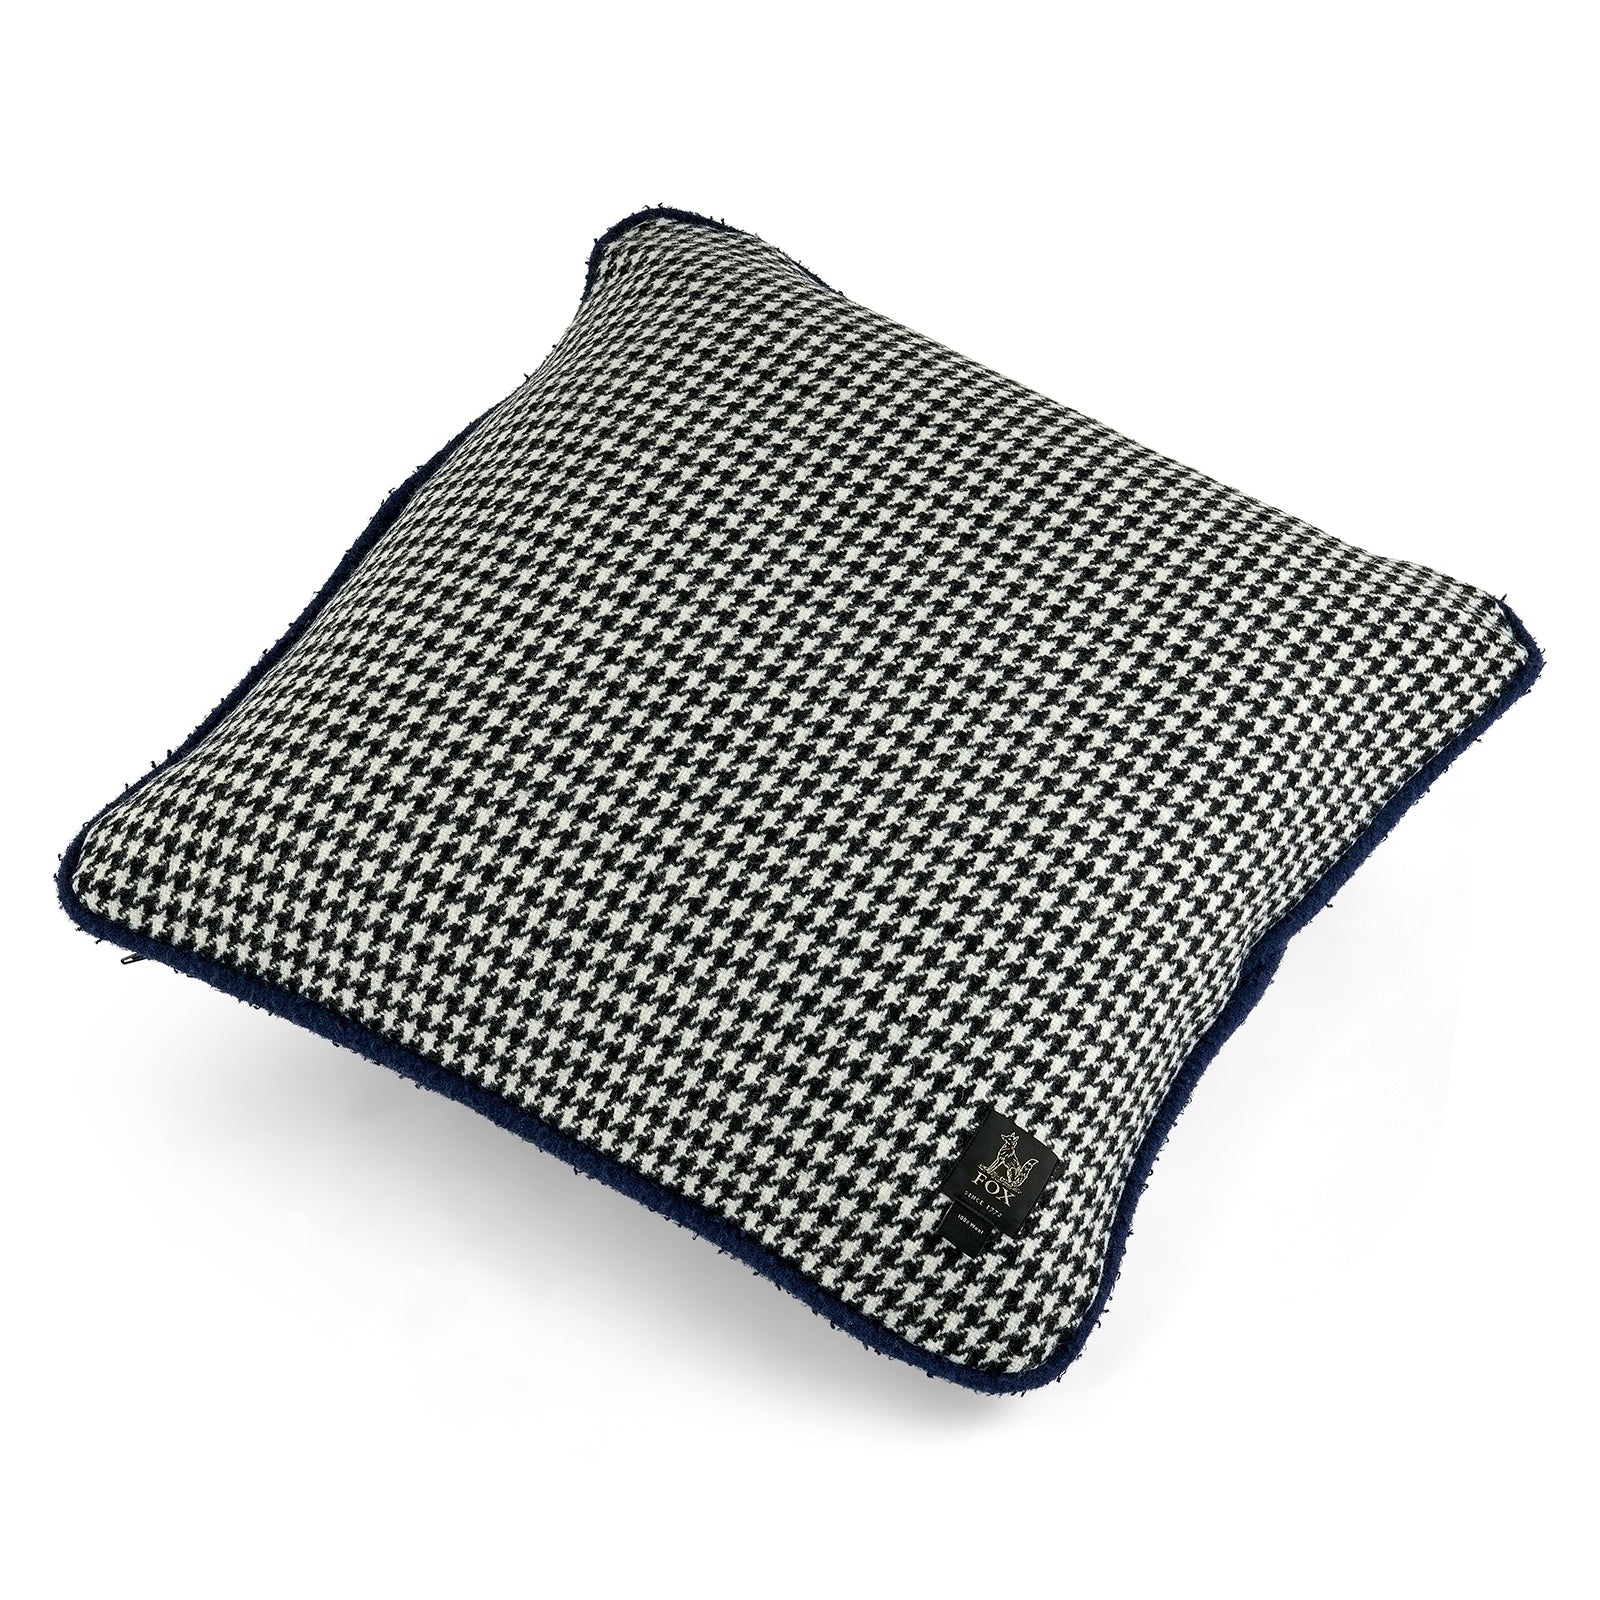 Monochrome Houndstooth with Blue piping Cushion Cover